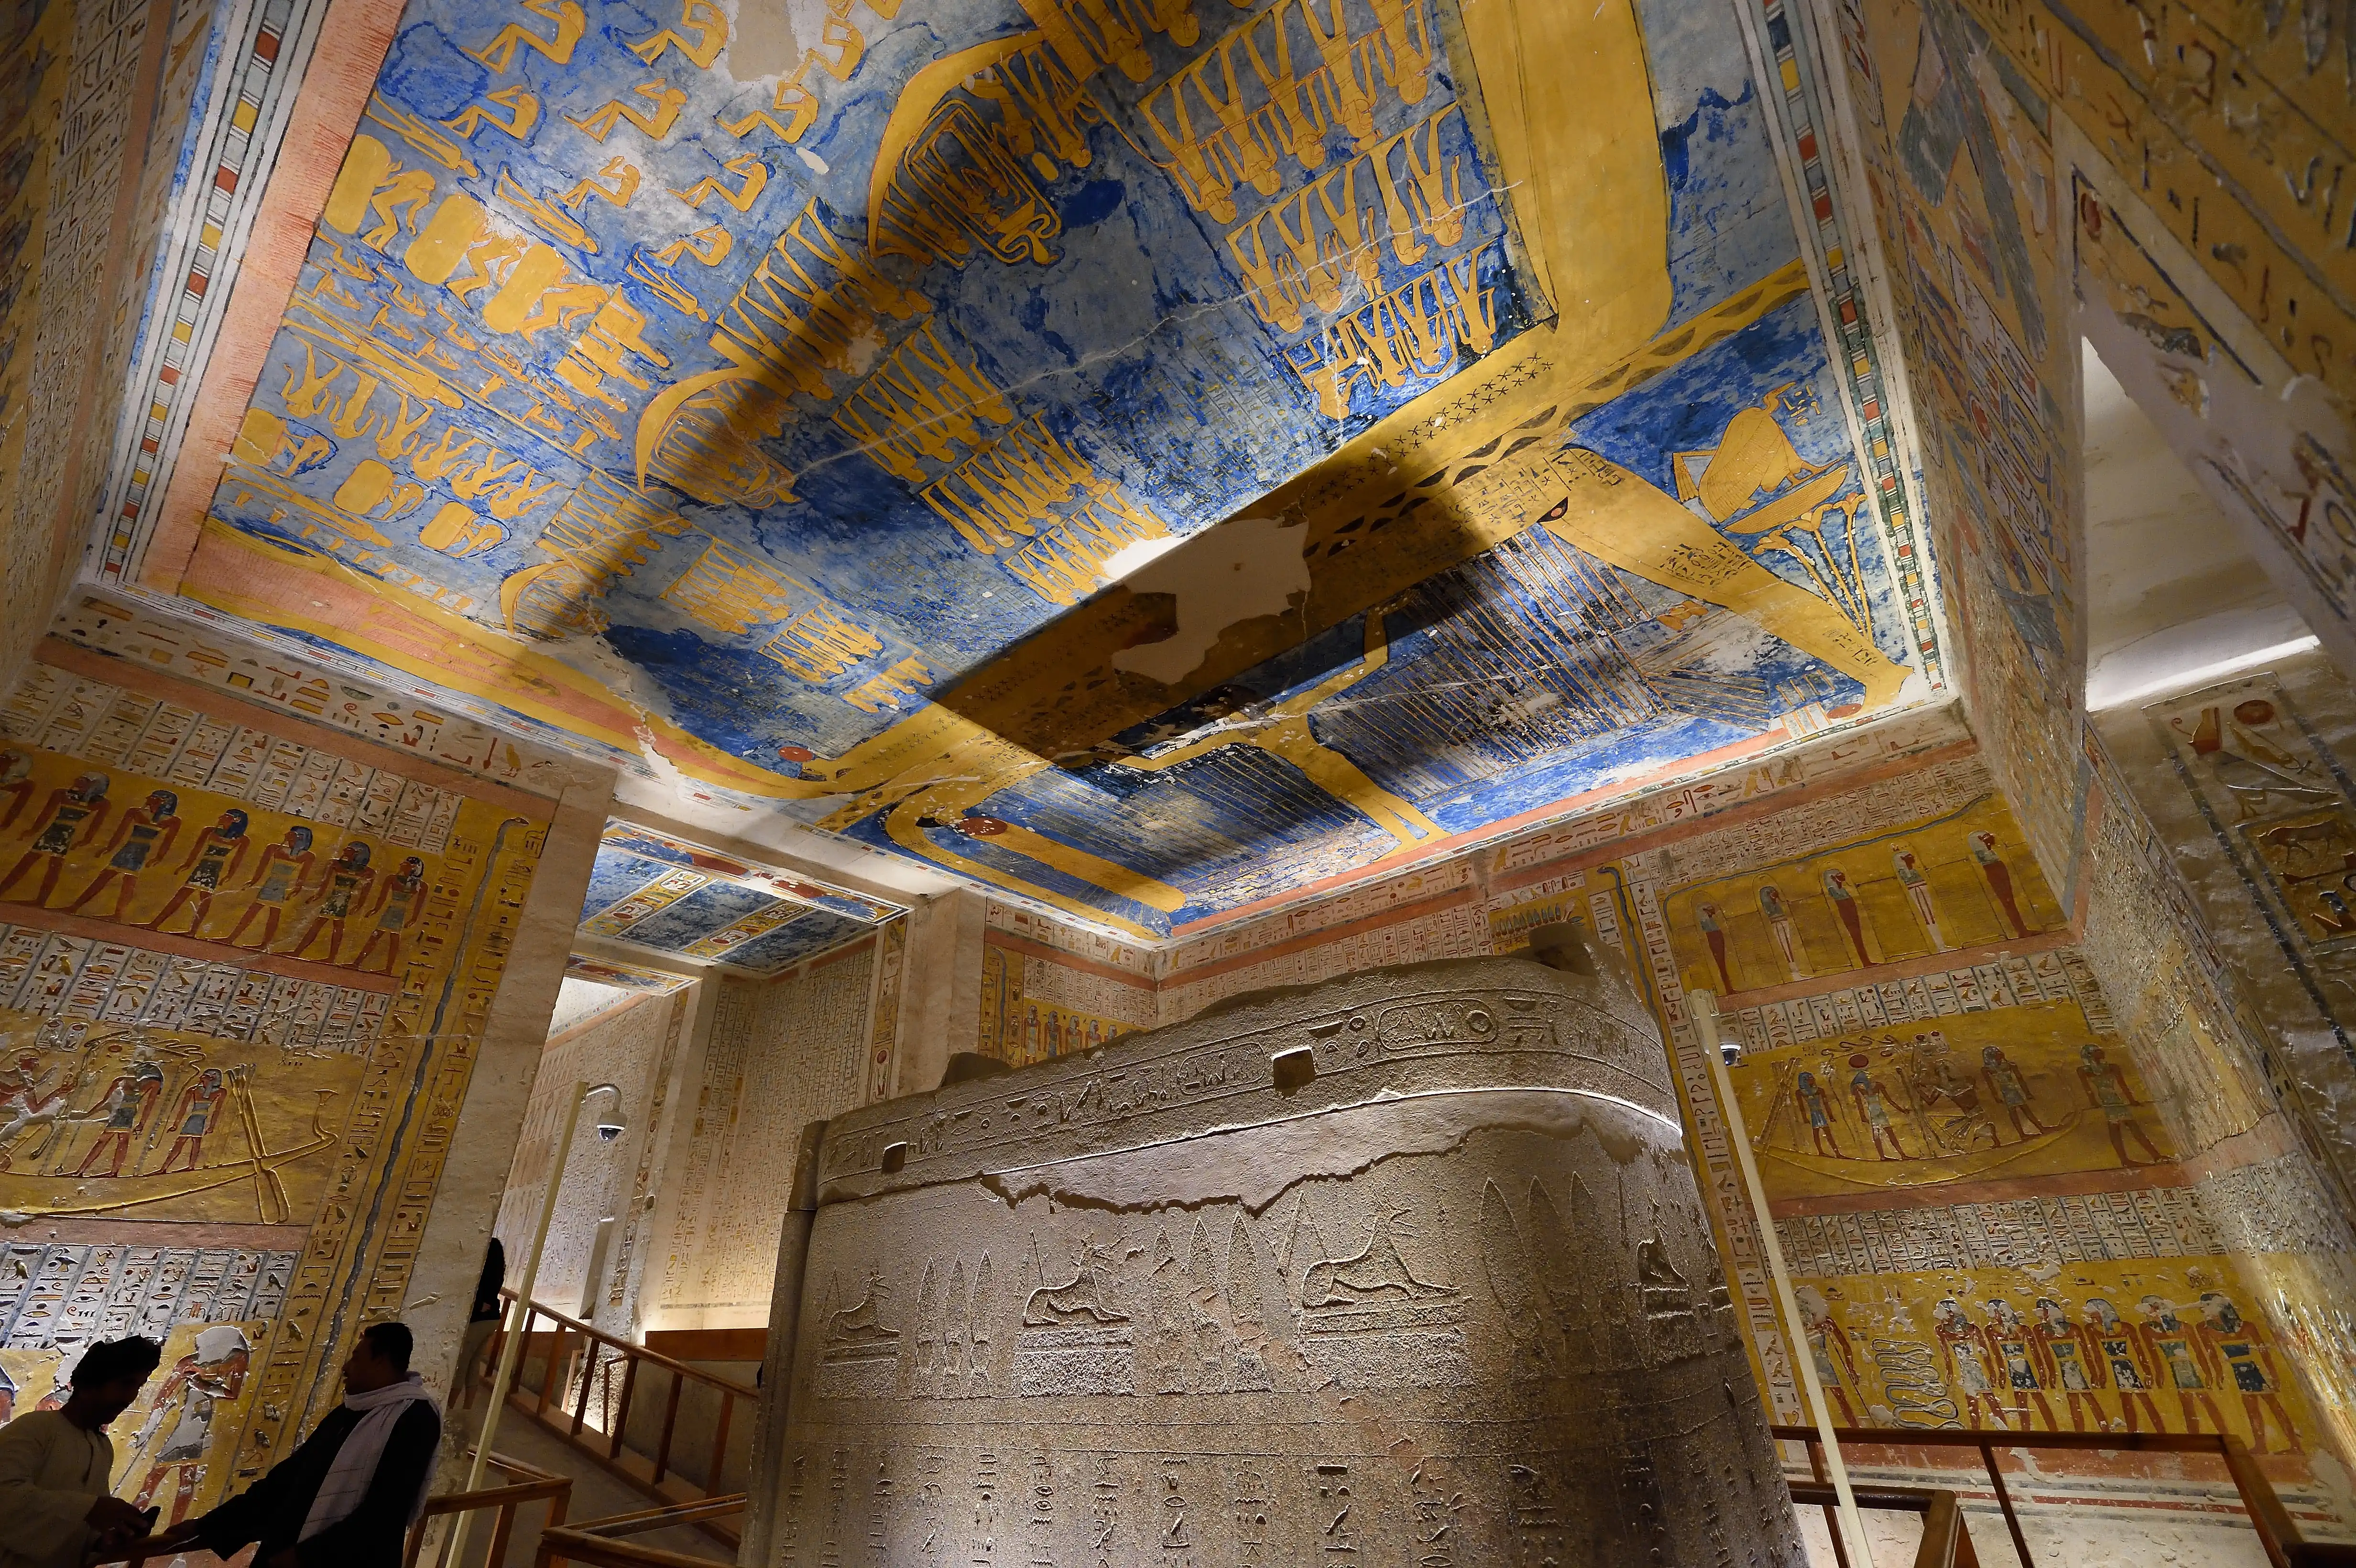 Tomb_of_Ramses_IV_in_Valley_of_the_Kings_on_West_Bank_of_Luxor_Egypt